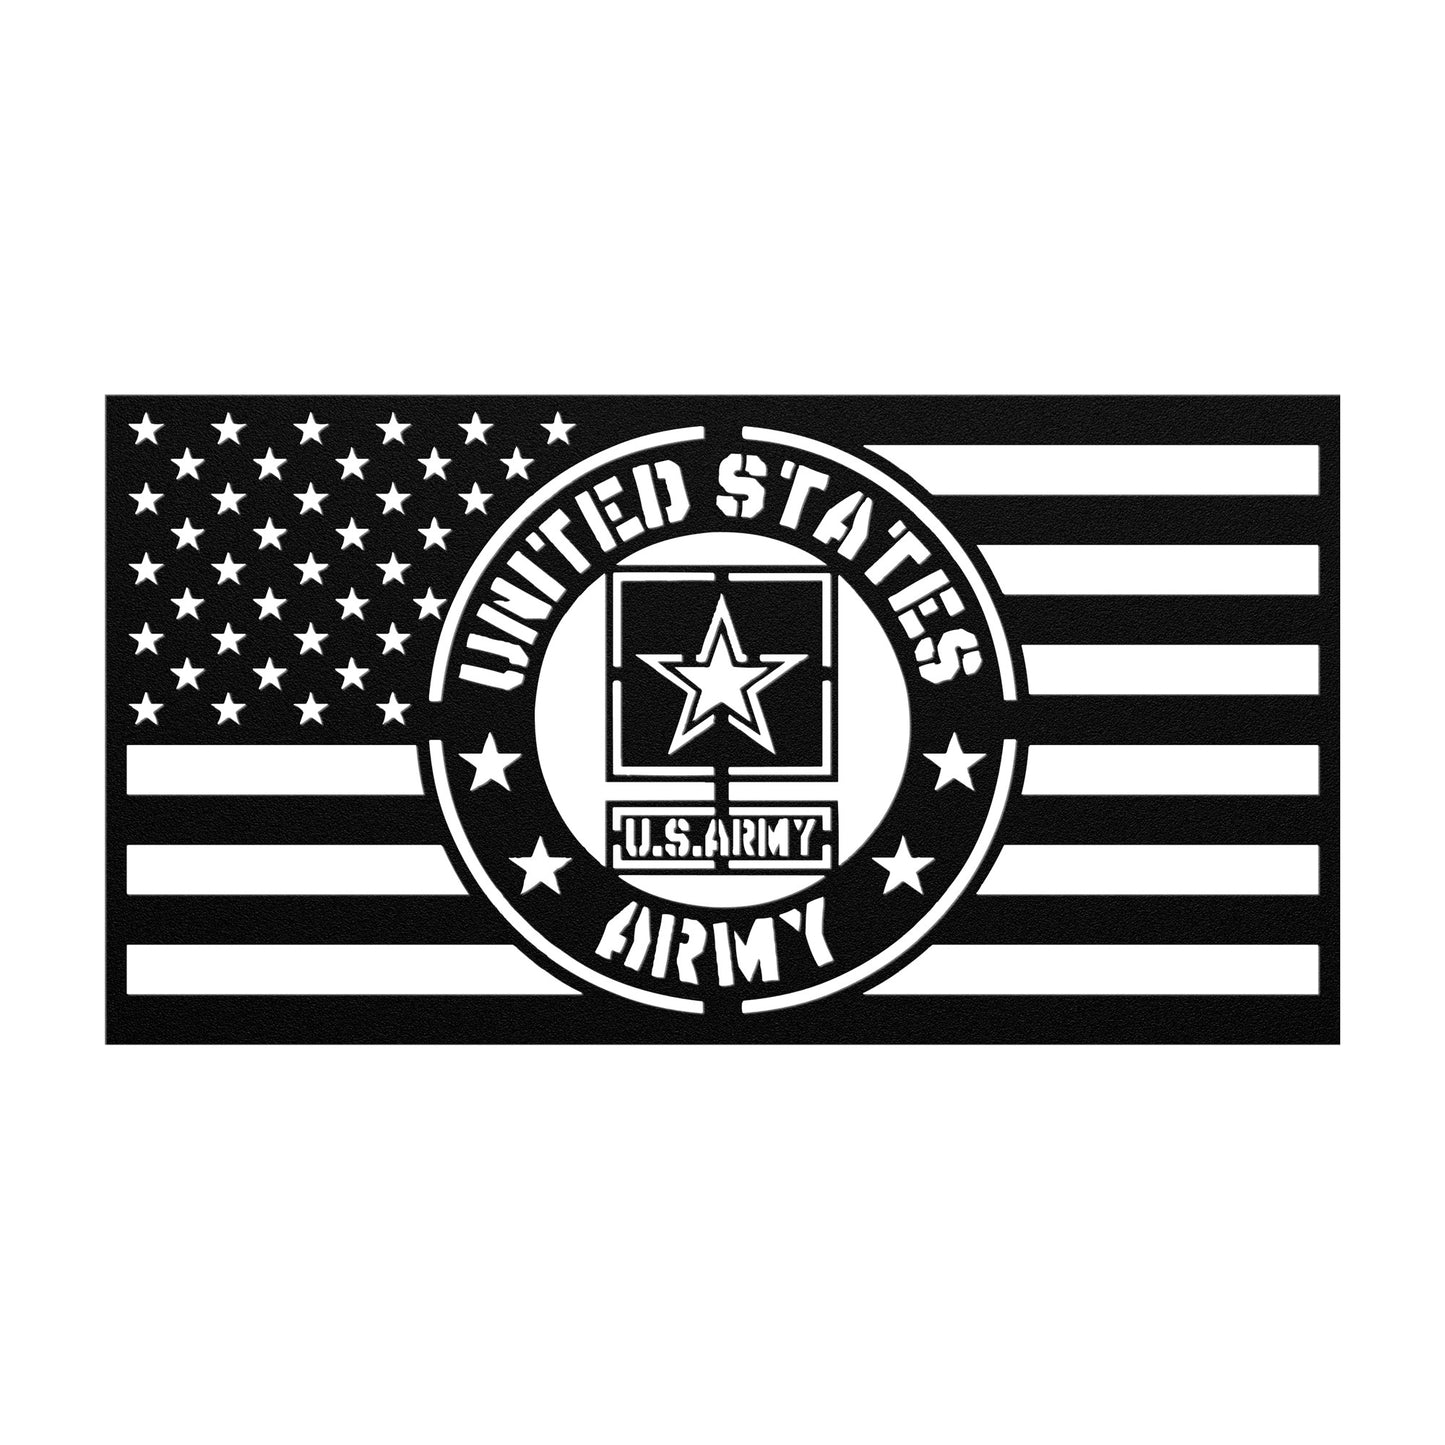 US Army Themed American Flag - Made in USA - Military Decor